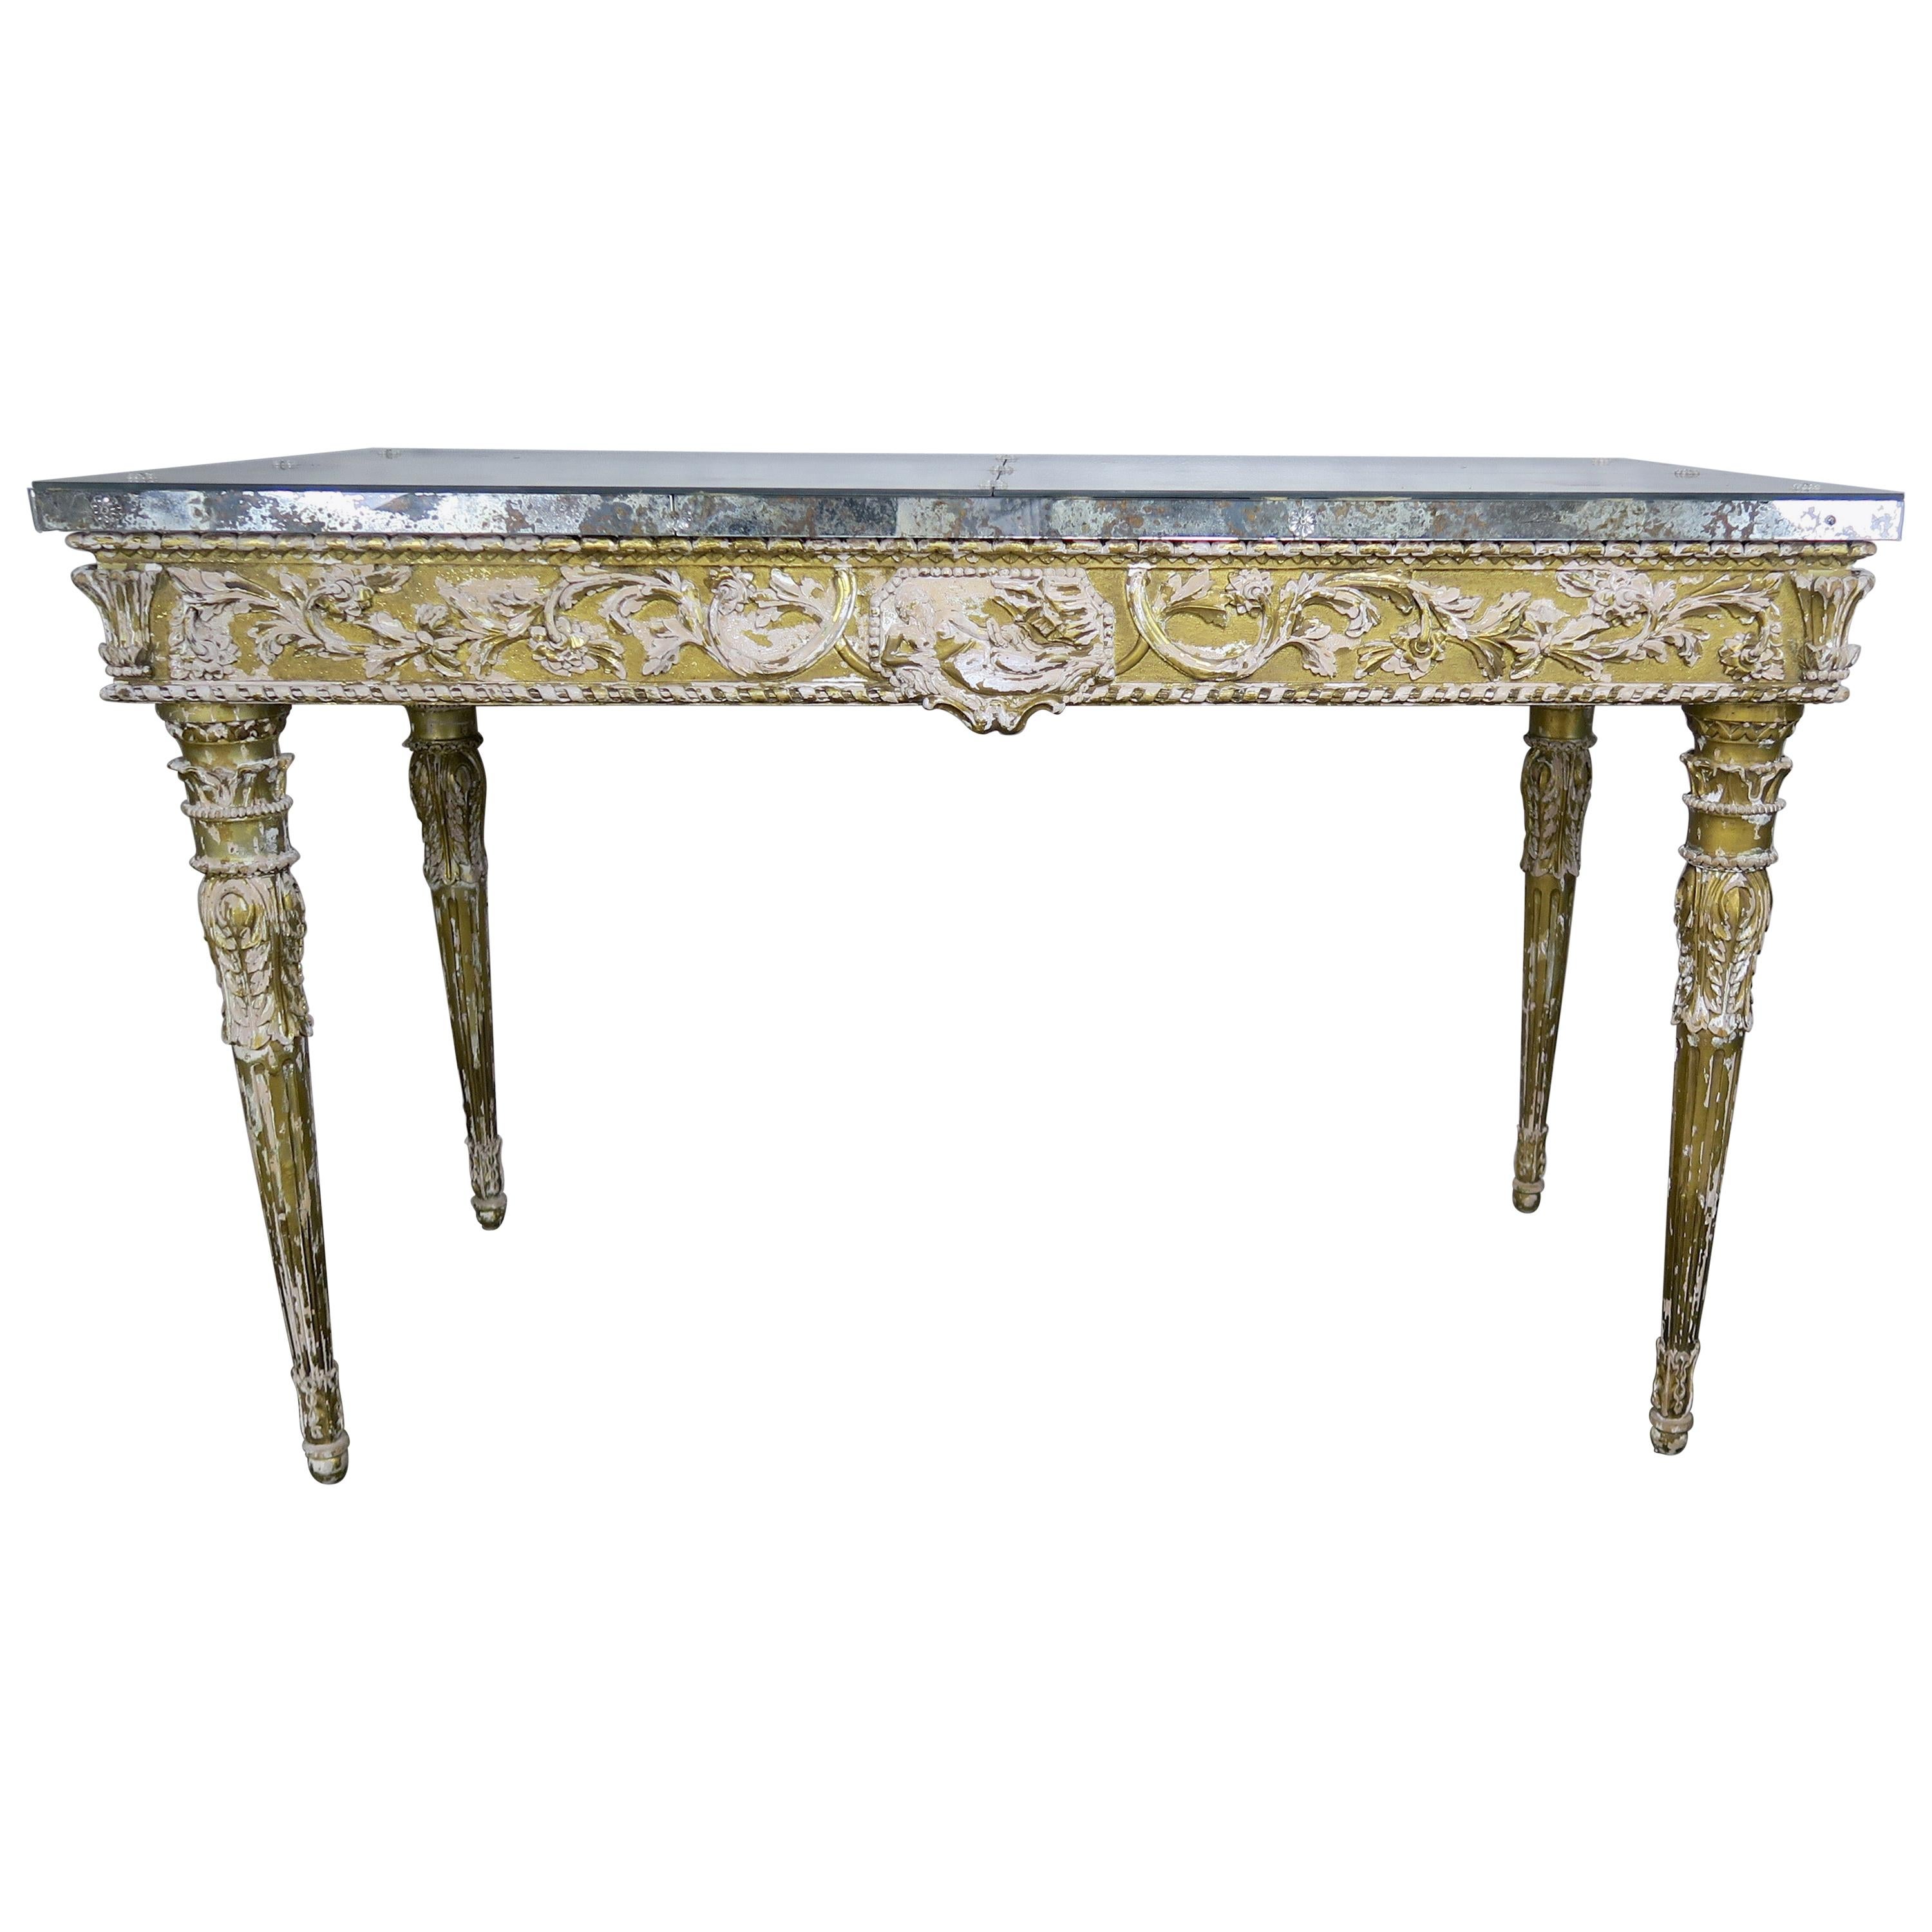 19th Century Italian Neoclassical Style Giltwood Console with Mirrored Top